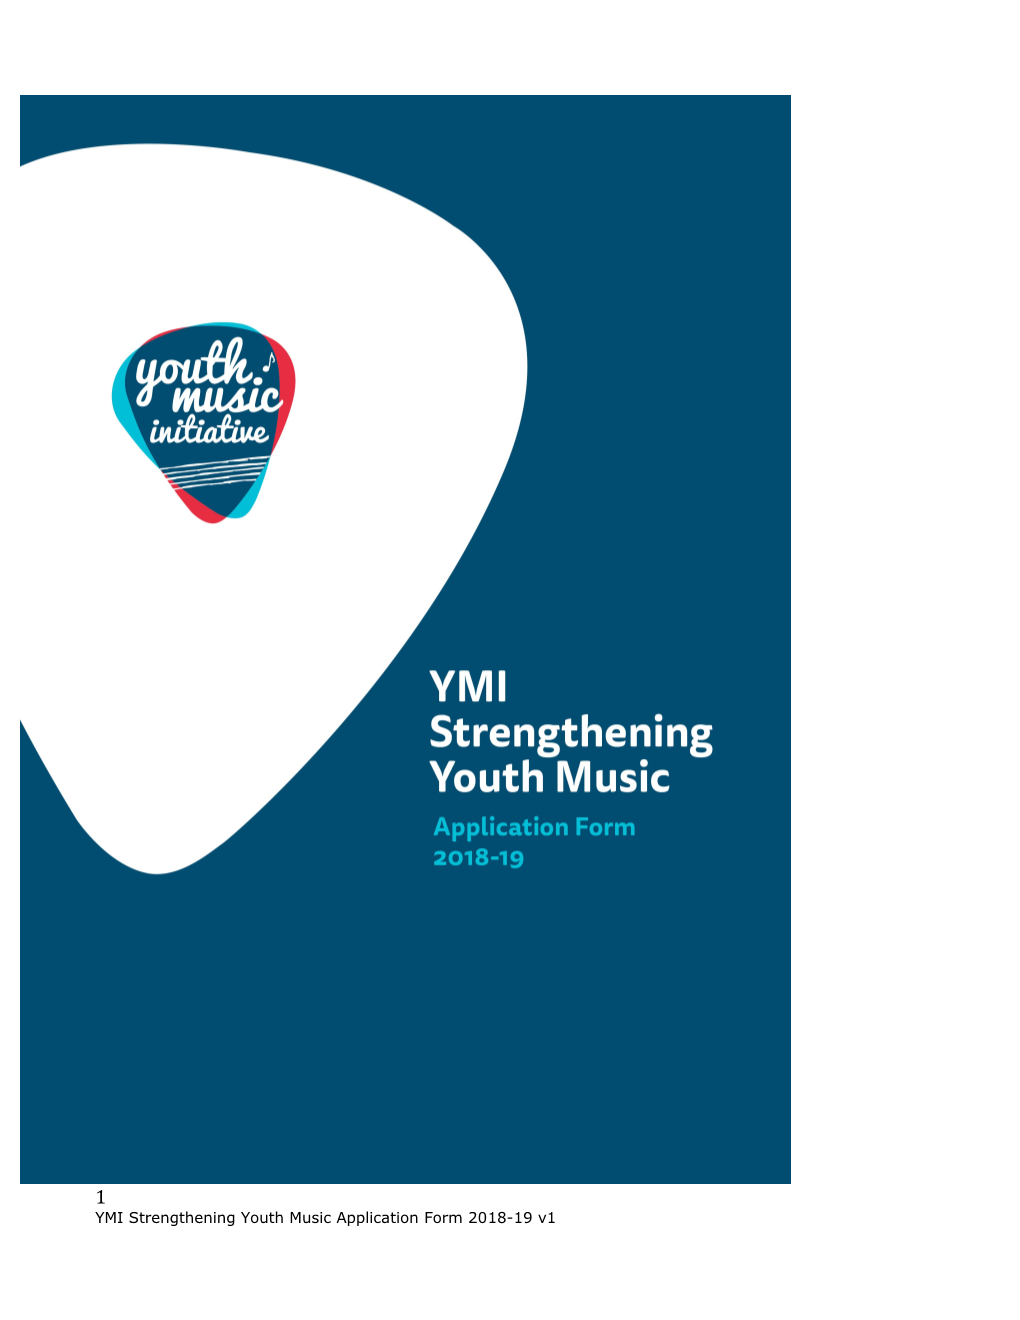 Youth Music Initiative